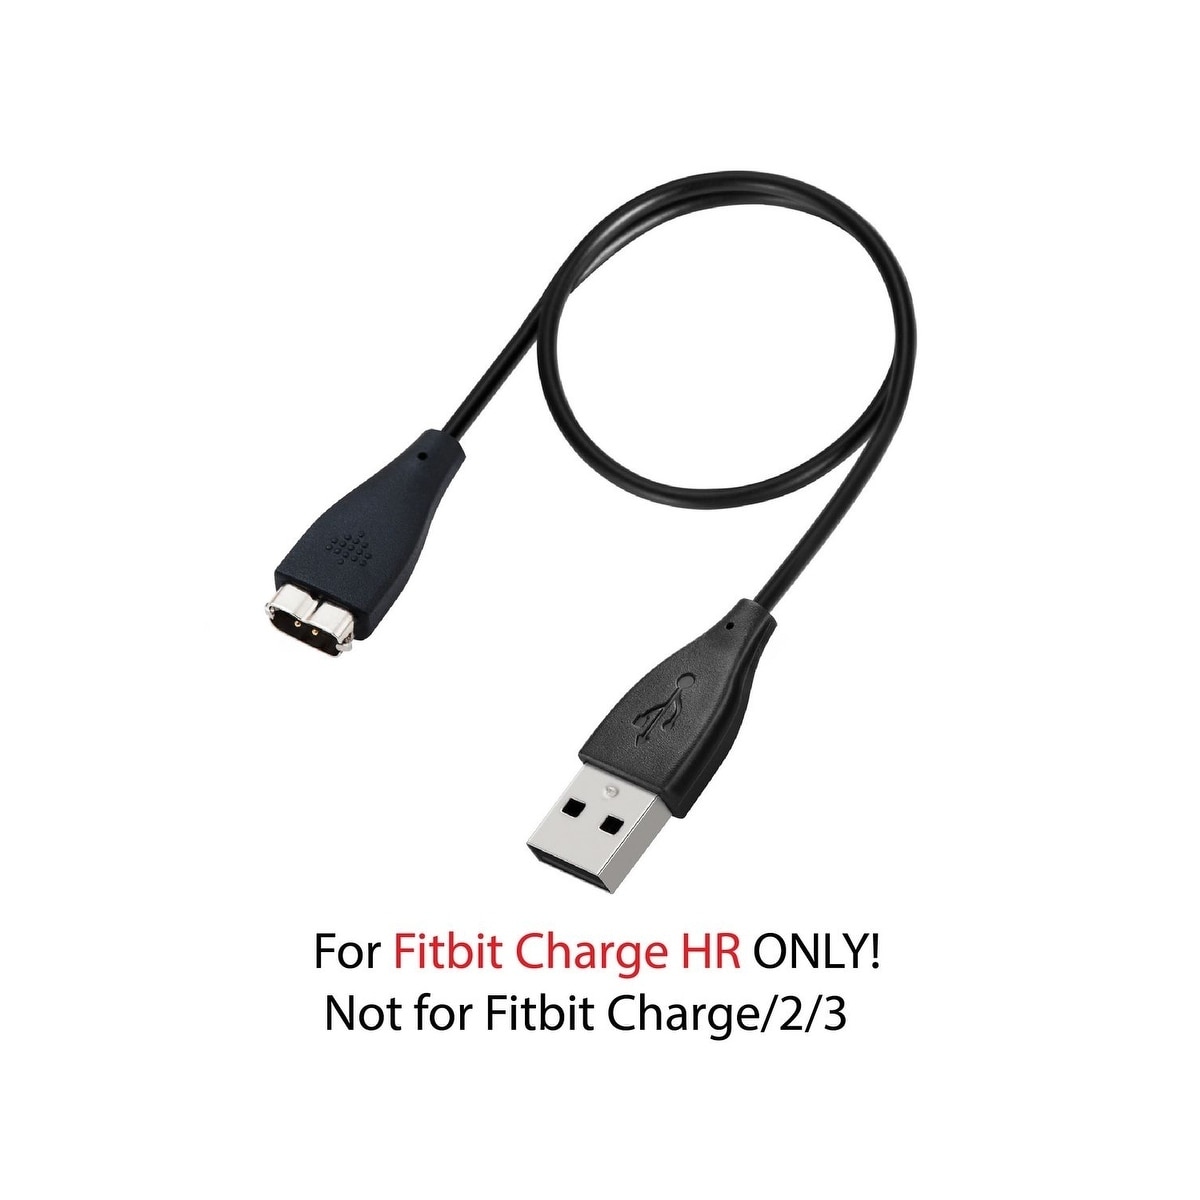 USB Charger Charging Cable For Fitbit Charge HR Wireless Activity Wristband G PL 